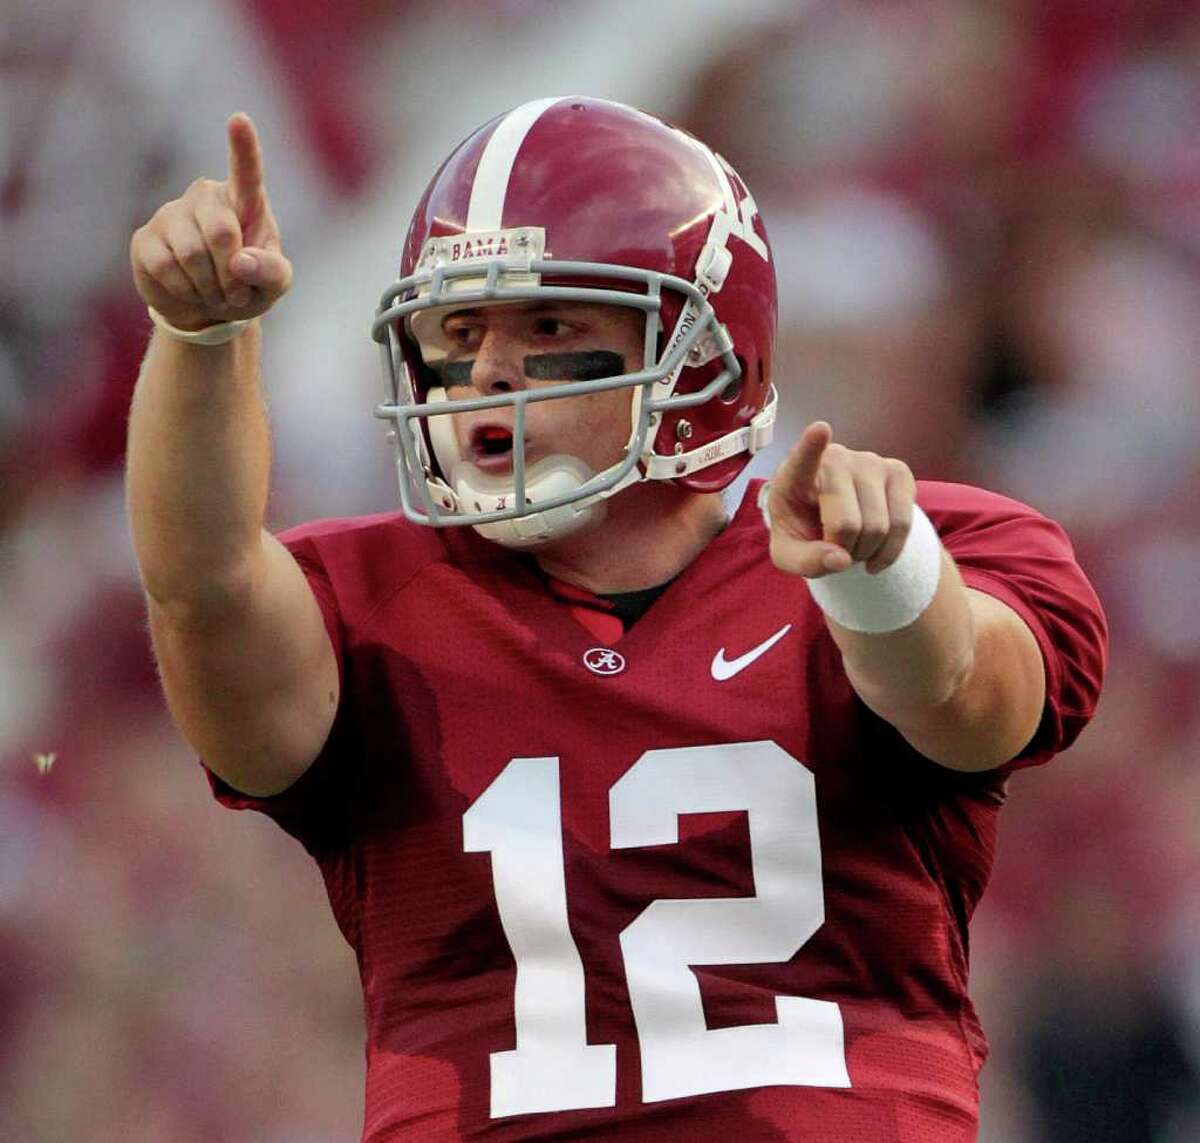 Greg McElroy signed with Alabama out of Southlake Carroll in 2006 and won a national title in 2009.